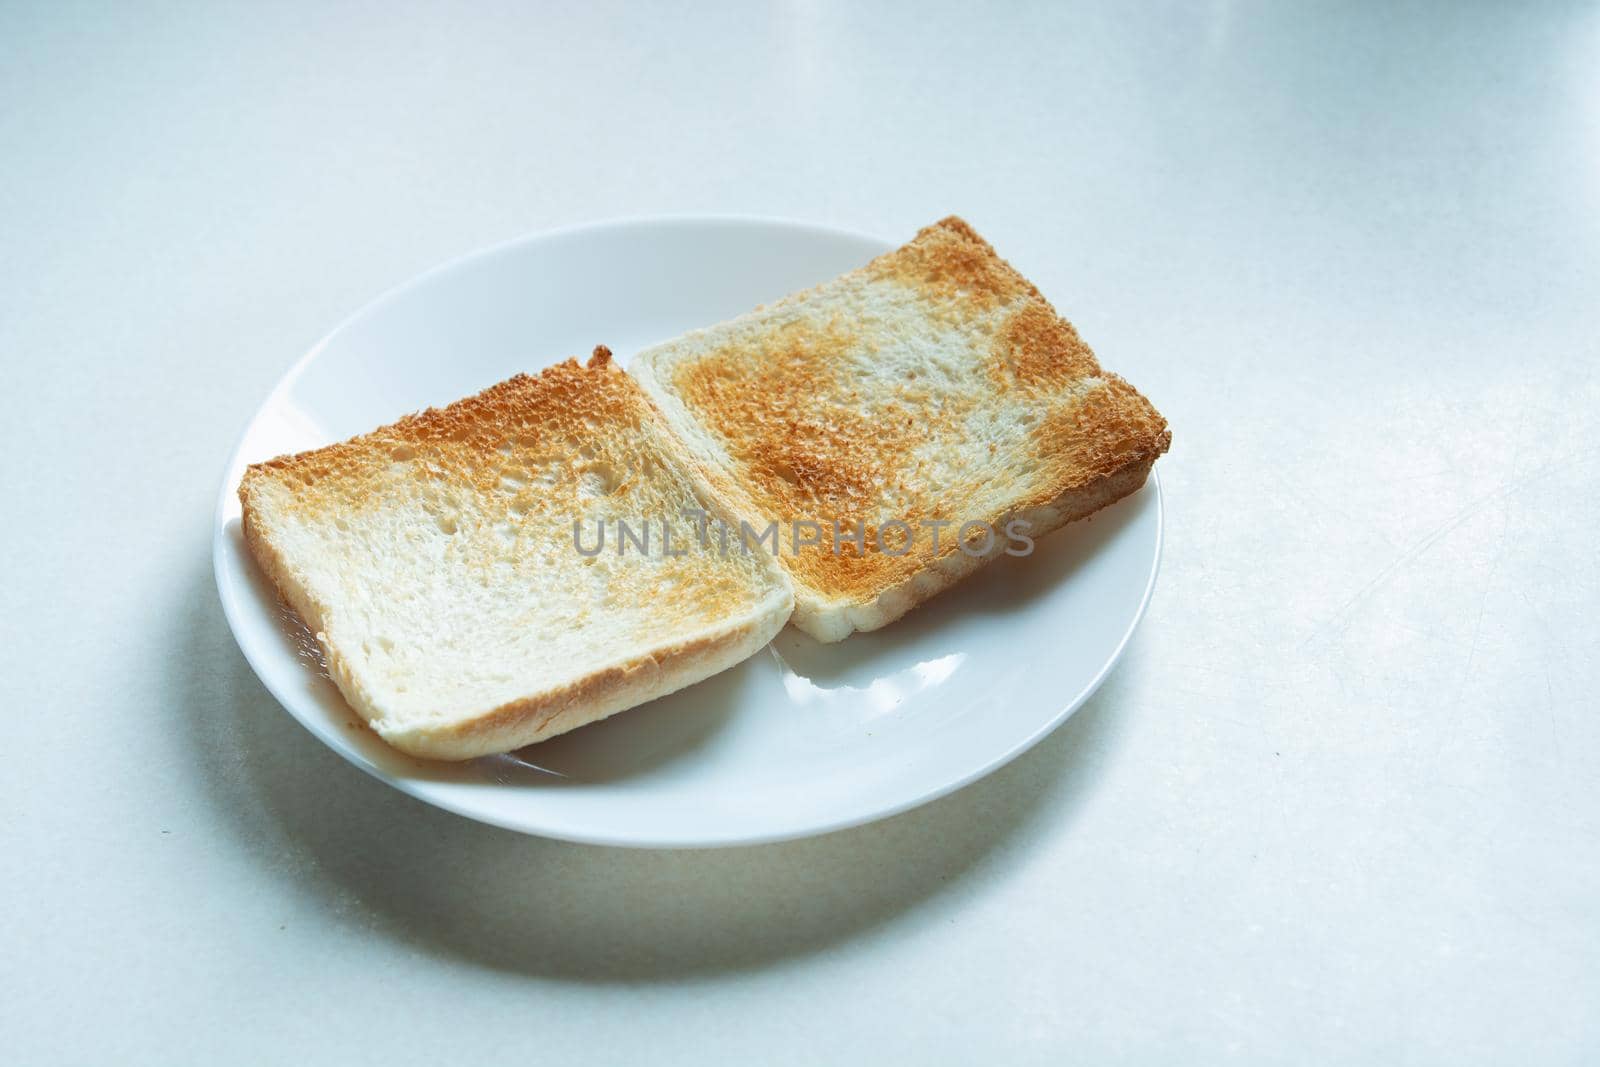 Two baked toasts lying on a white plate